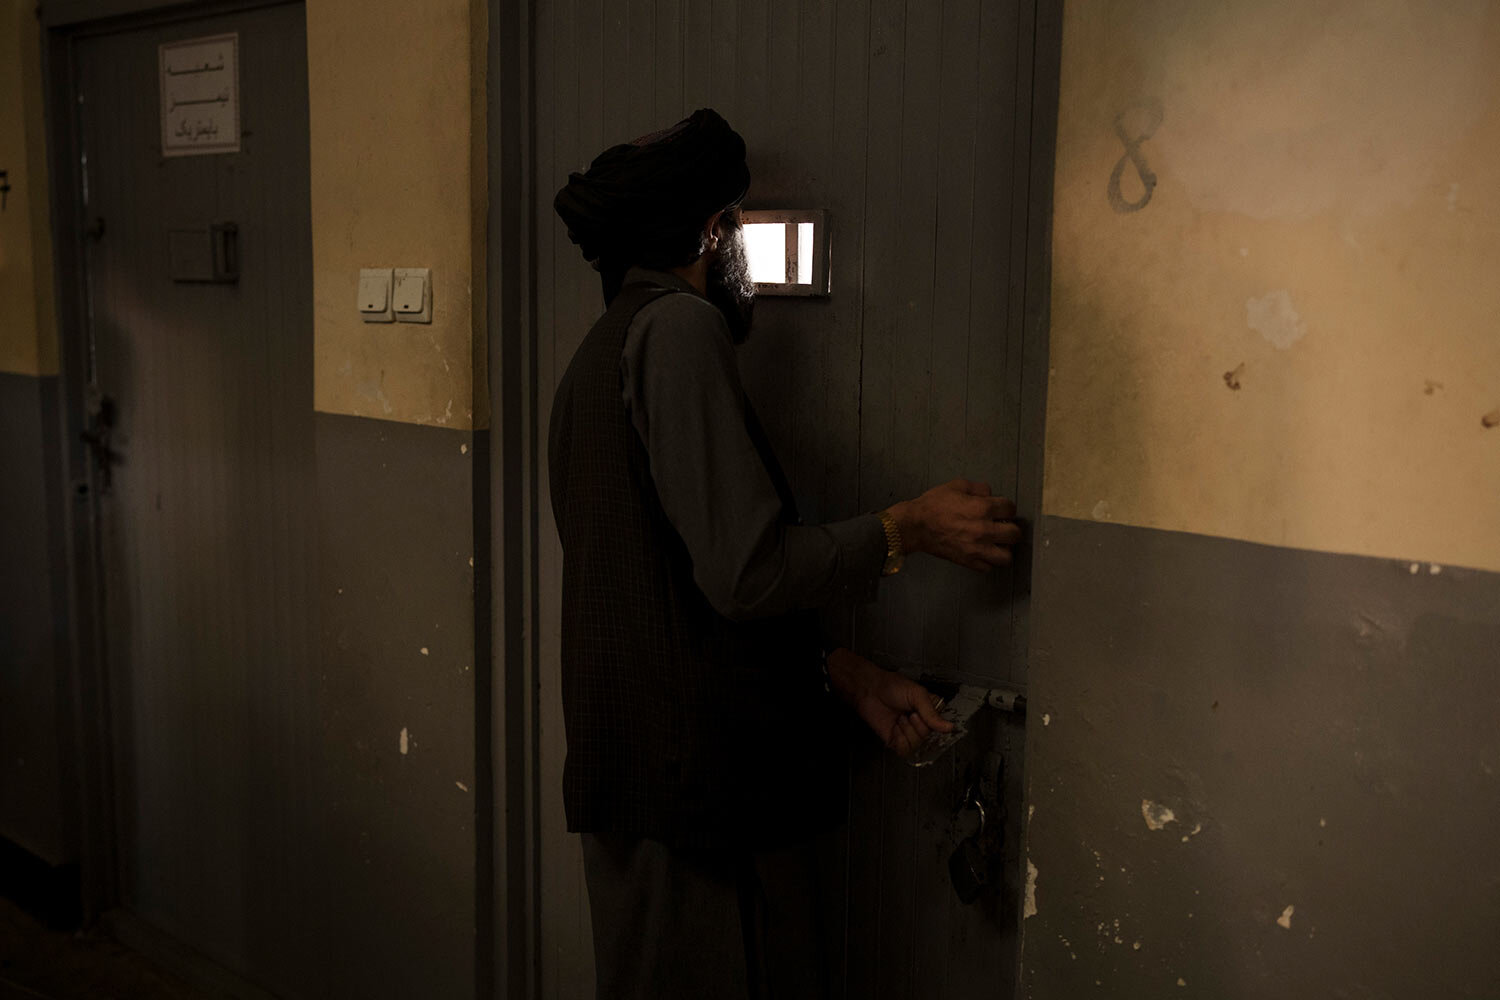  A Taliban fighter looks into a holding cell for detainees at a police station in Kabul, Afghanistan, Sunday, Sept. 19, 2021. (AP Photo/Felipe Dana)  